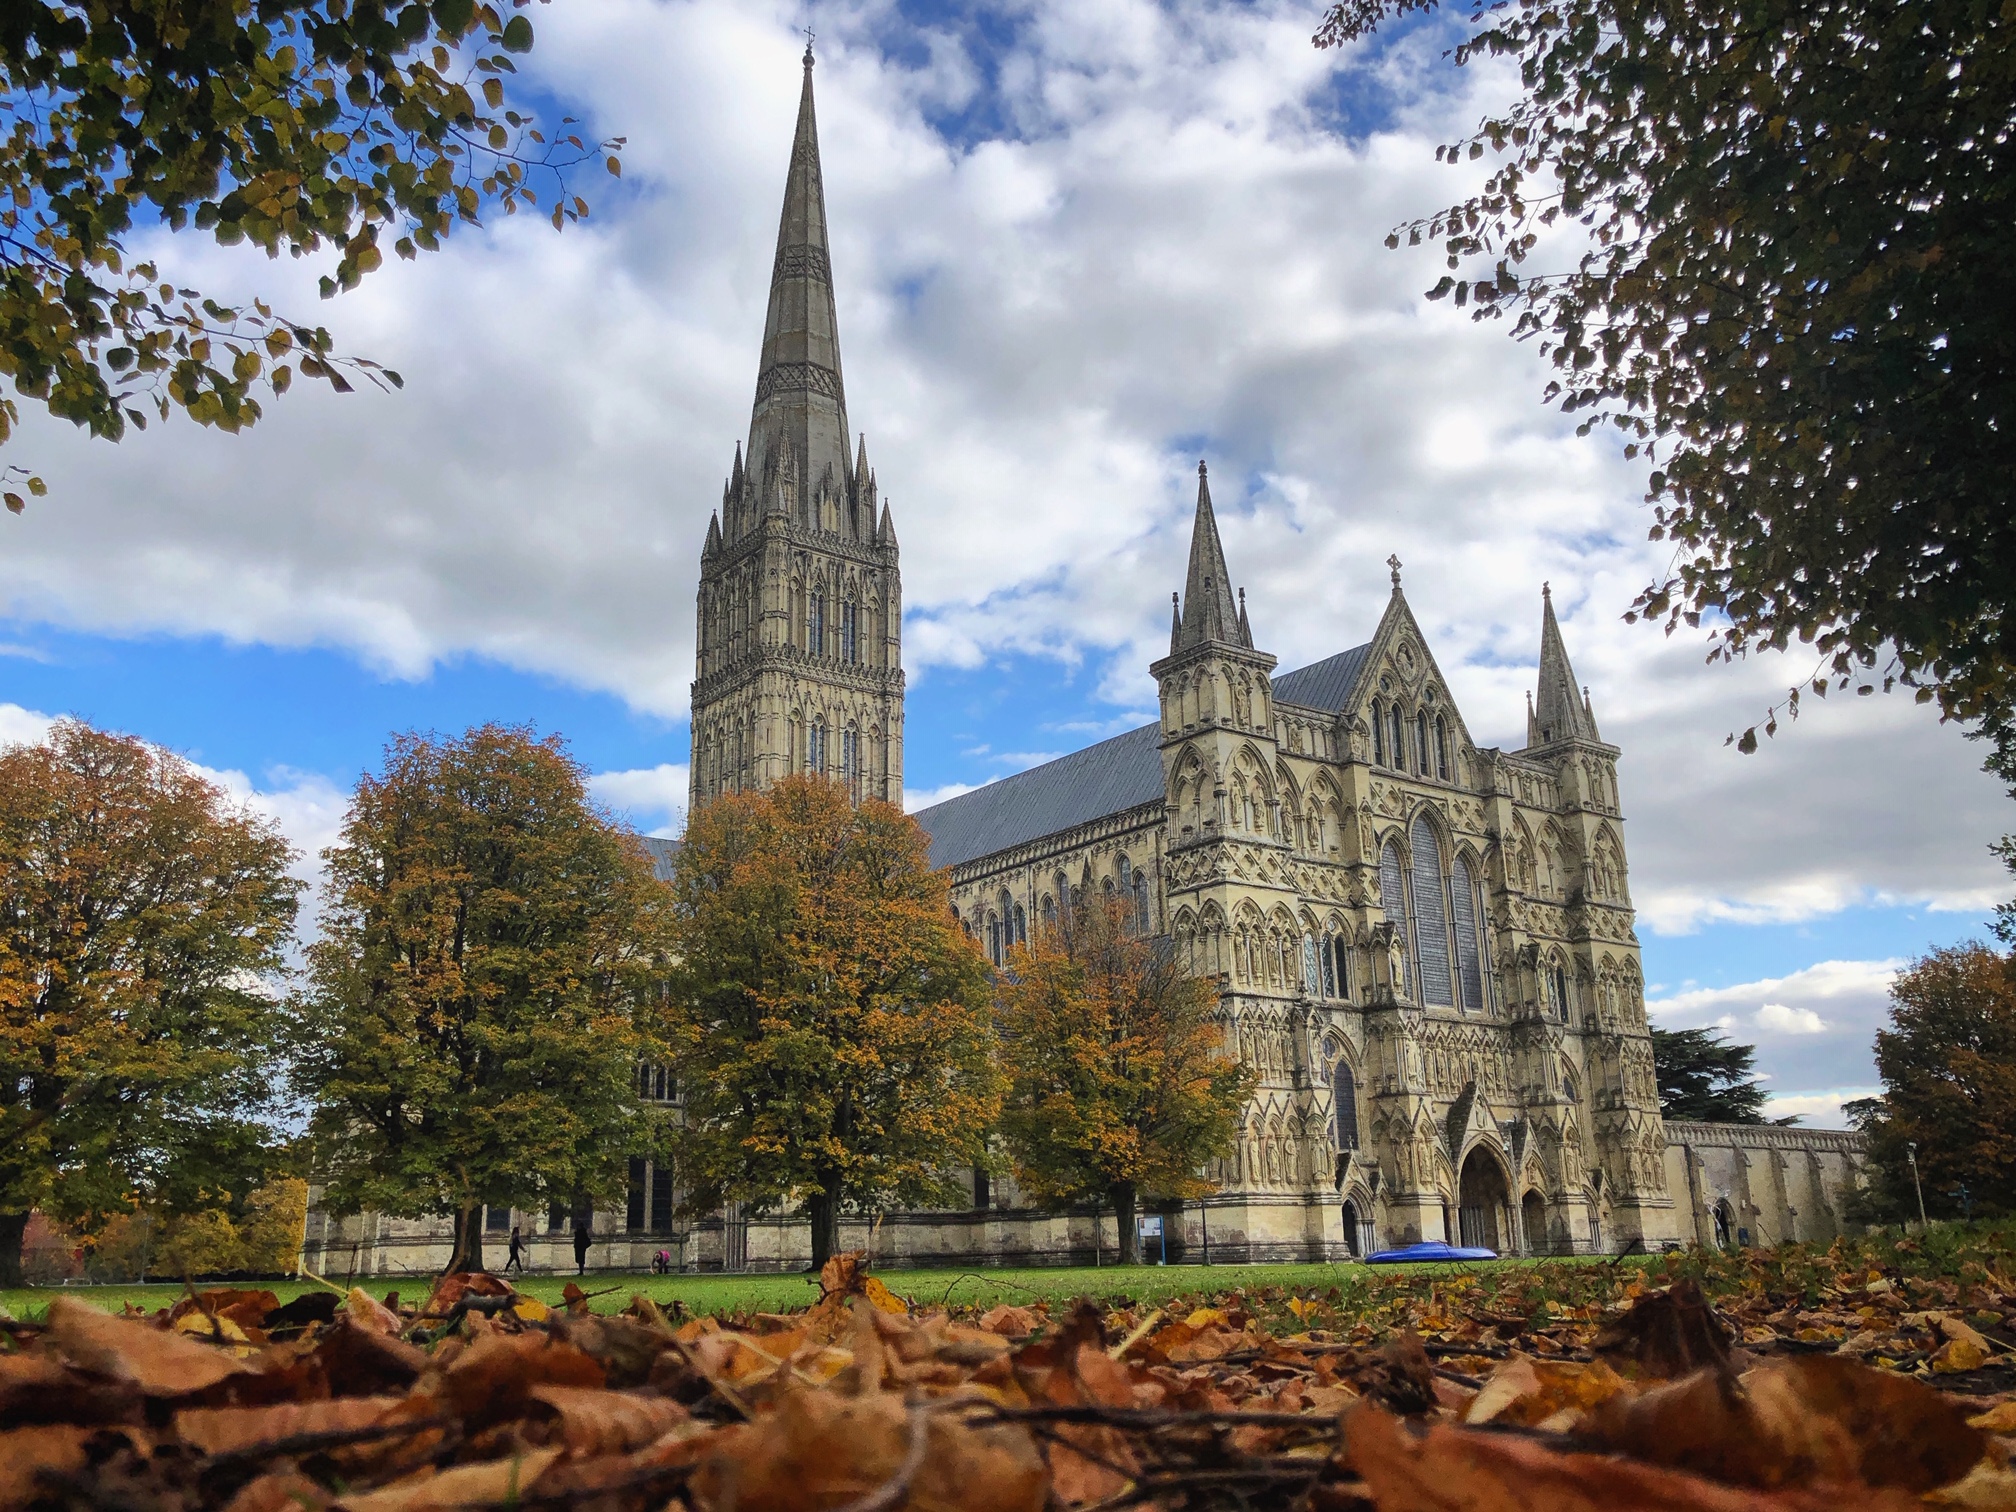 Cathedral exterior in autumn with fallen leaves on the ground